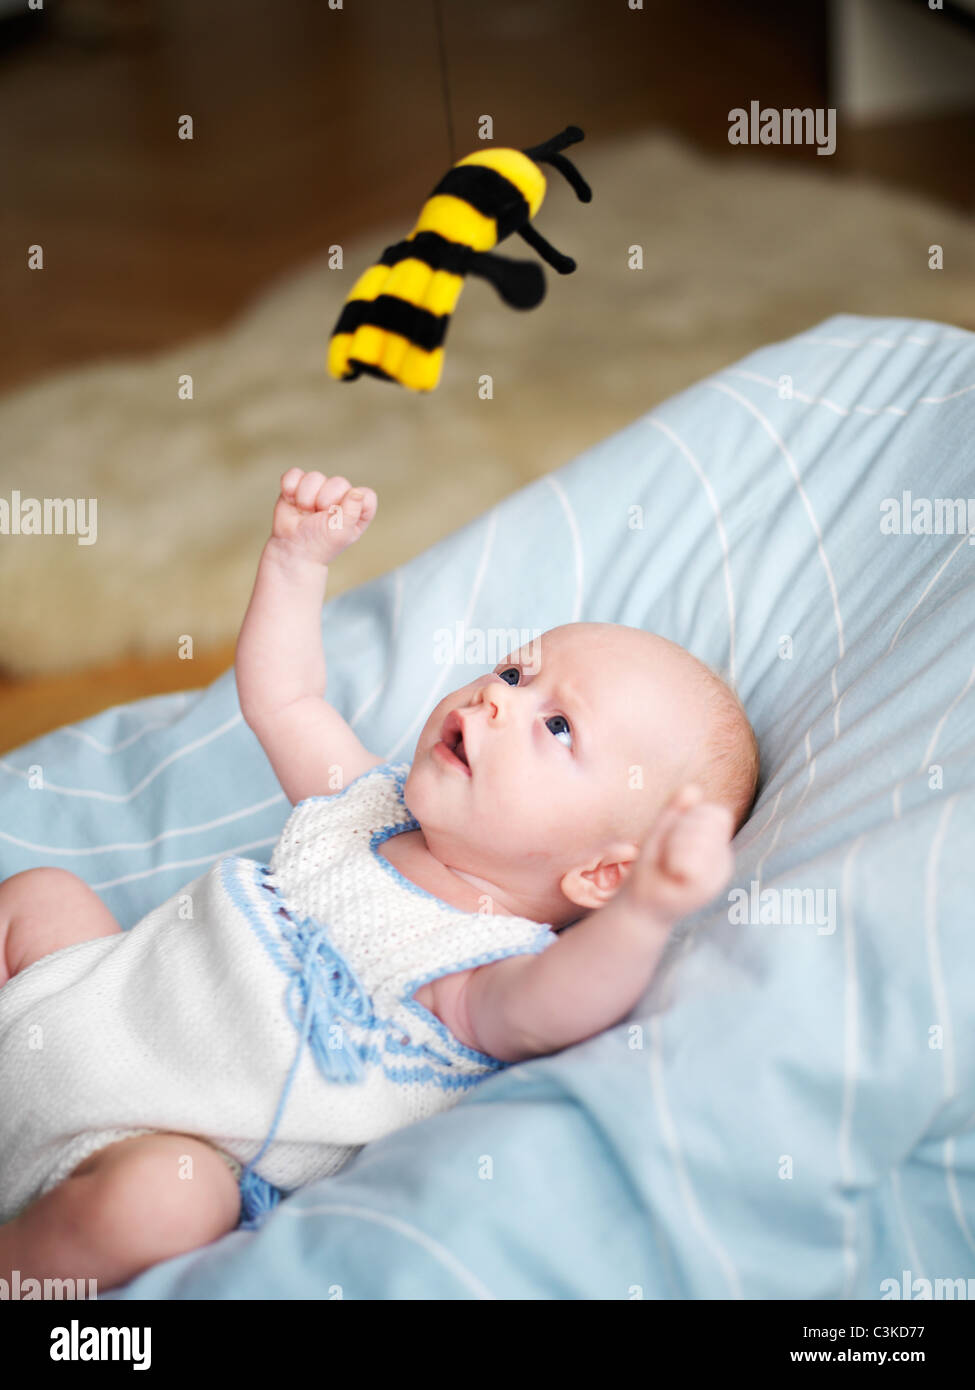 Baby Playing with toy wasp Banque D'Images